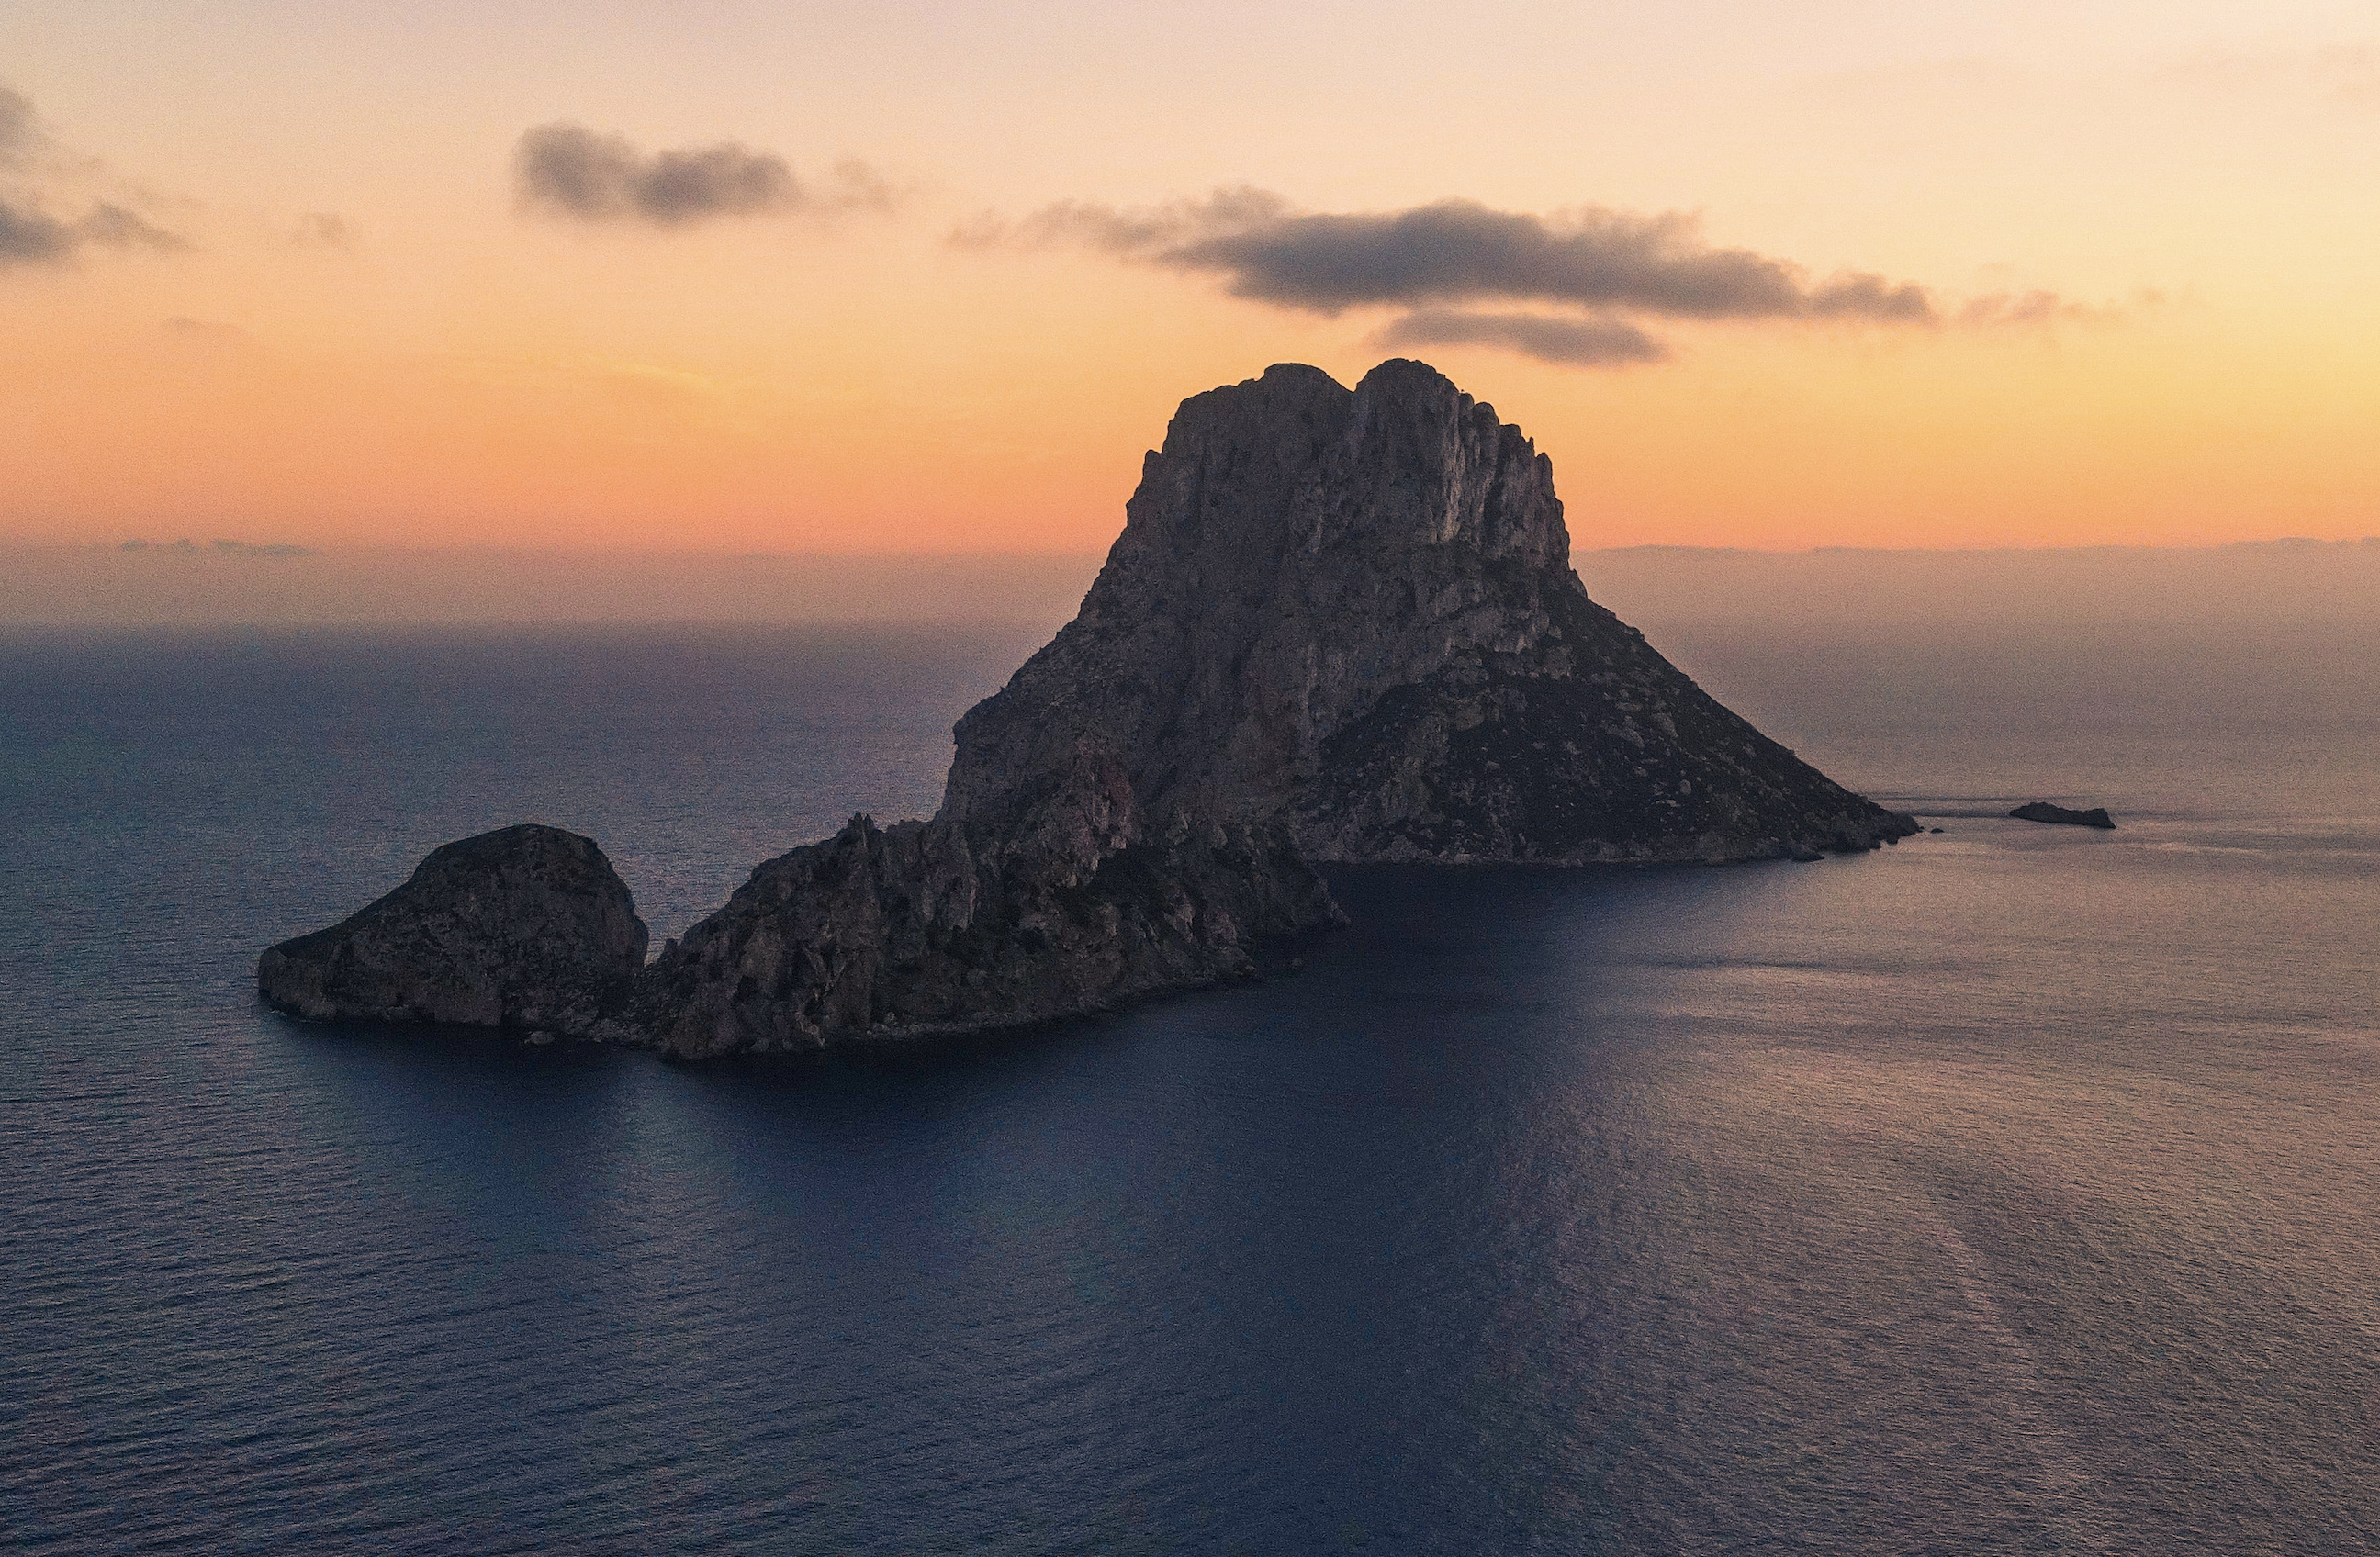 What months mark the peak season for visiting Ibiza?